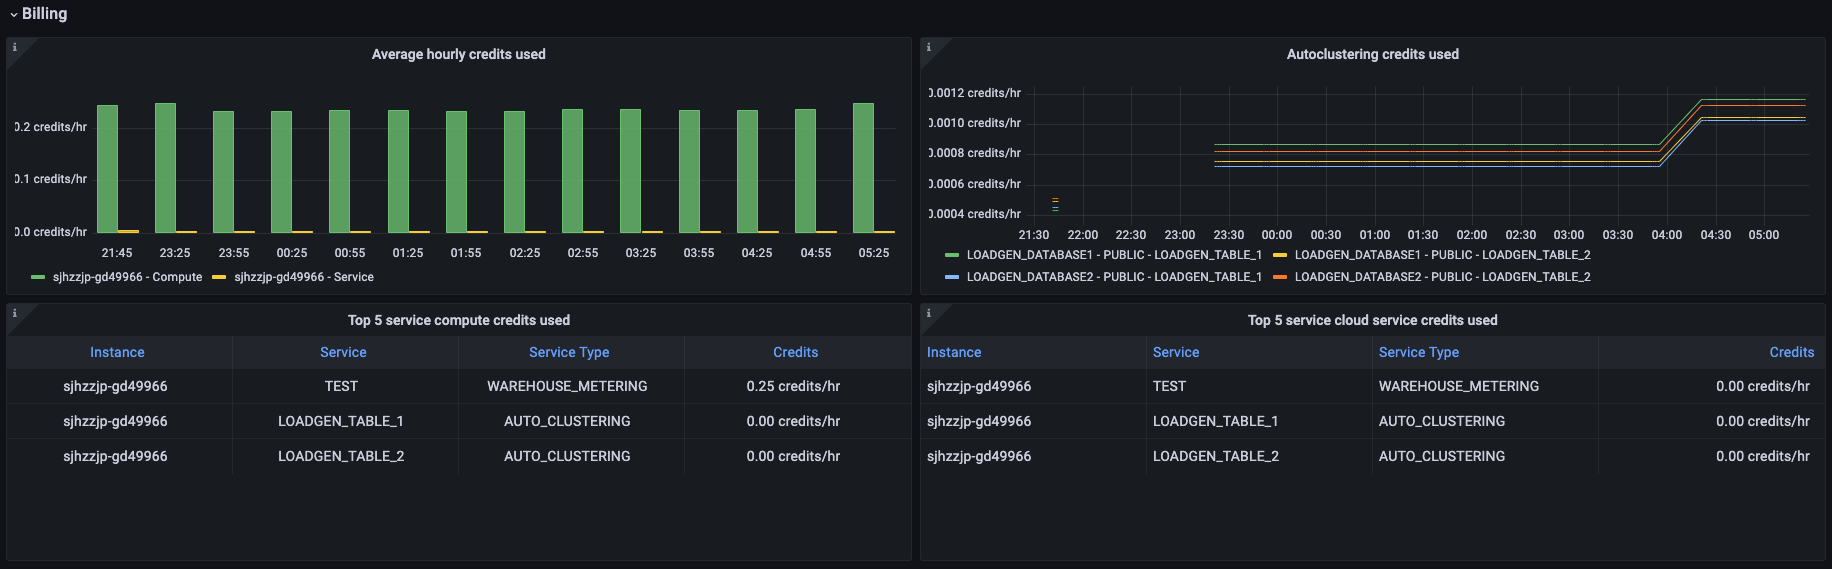 Snowflake overview dashboard (2/3).